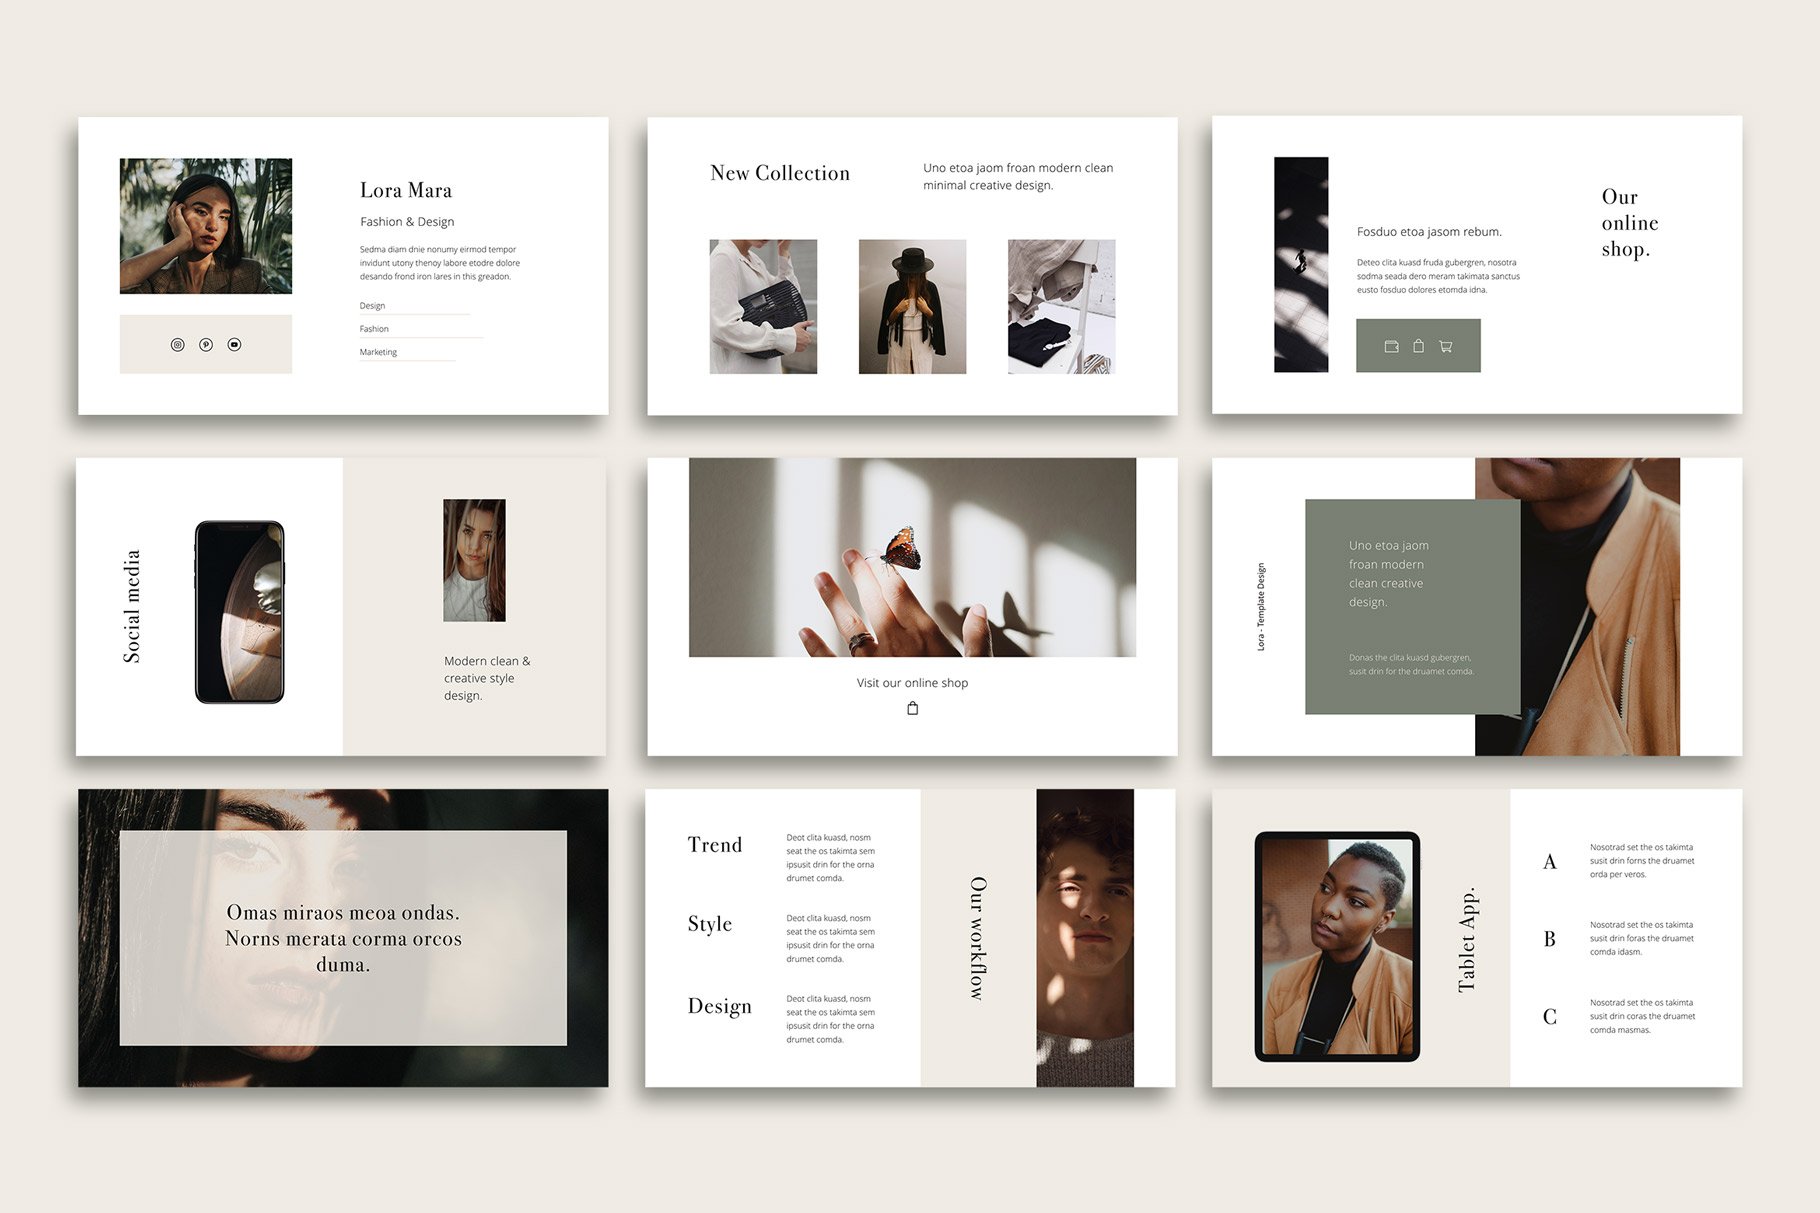 Modern and creative template design for contemporary ideas and topics.